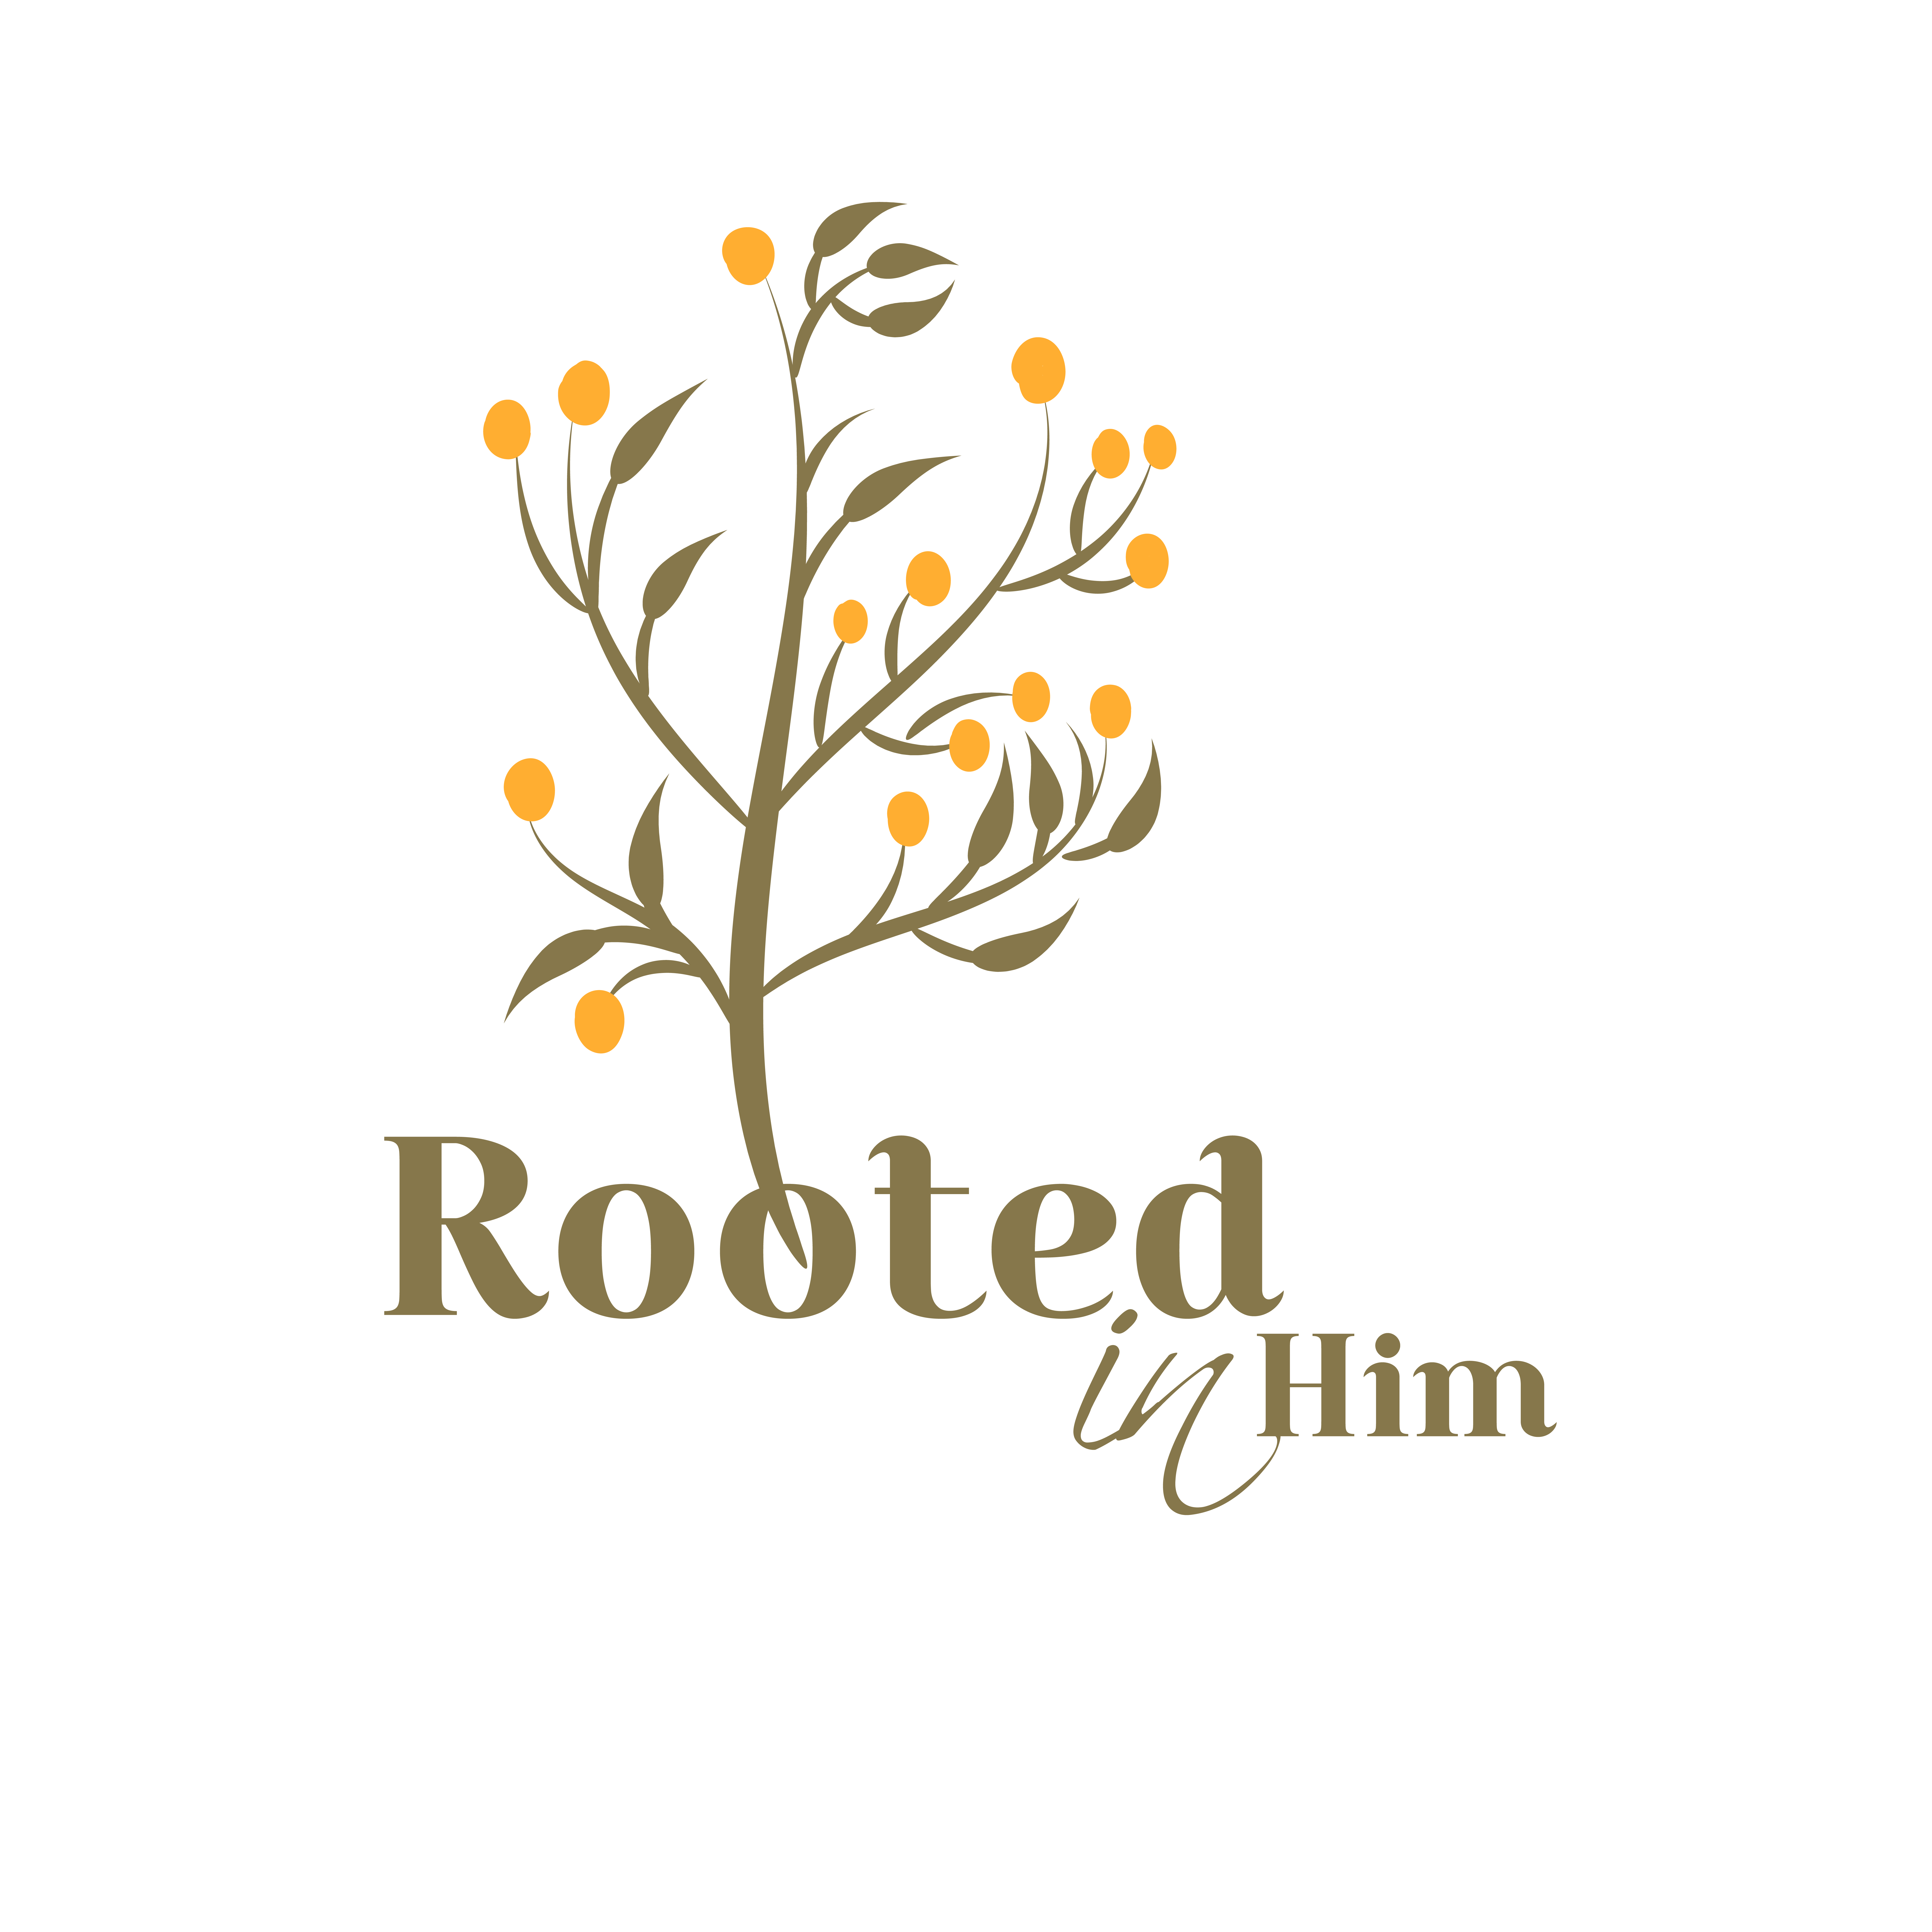 The logo for rooted by him.